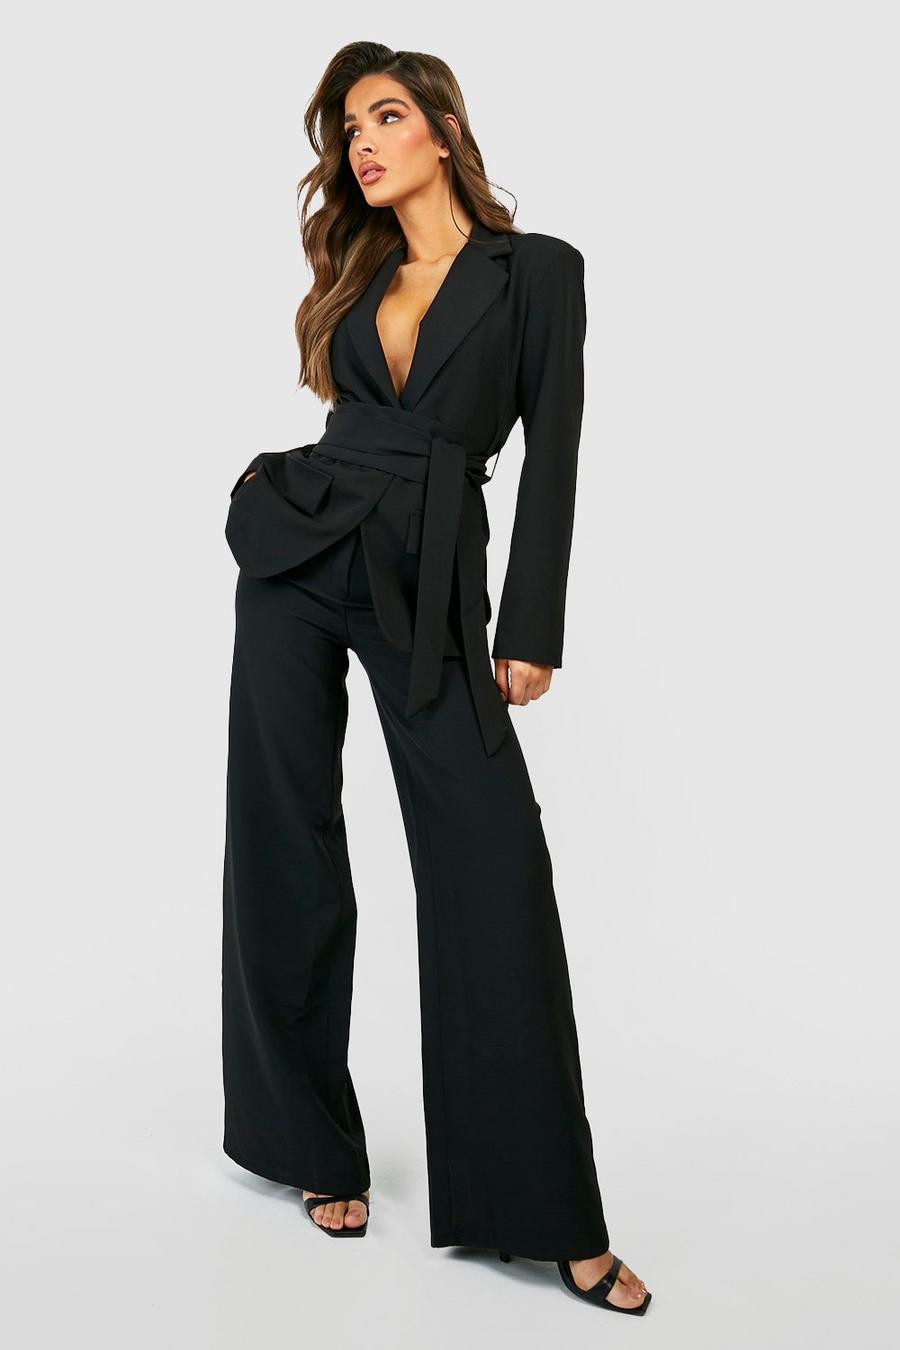 Black Straight Leg Seam Front Tailored Pants image number 1